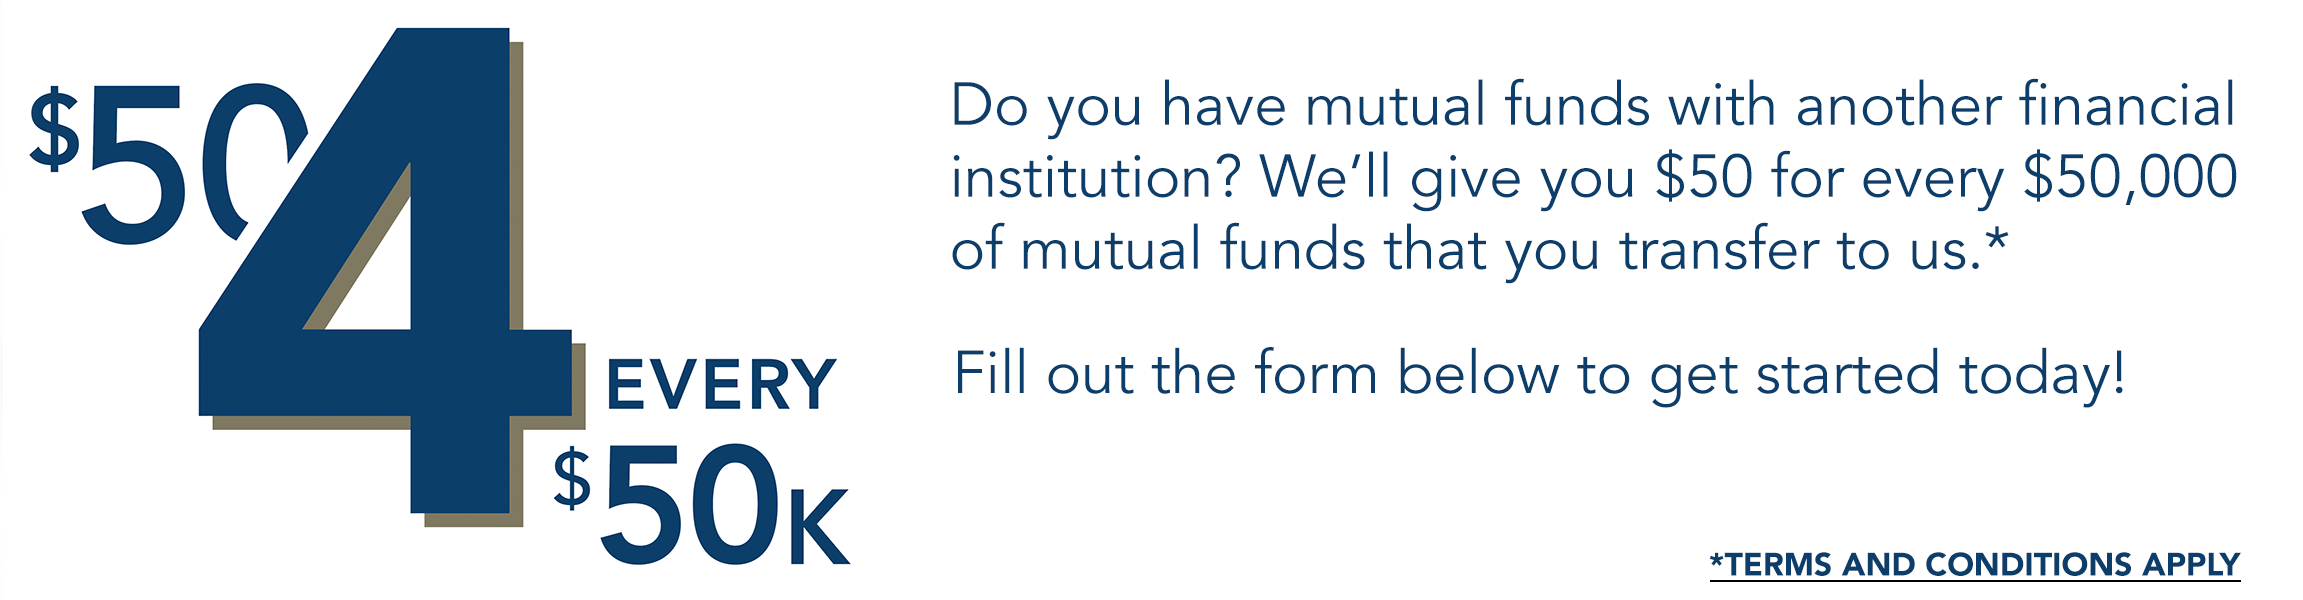 Receive $50 for every $50,000 in mutual funds you transfer to us!